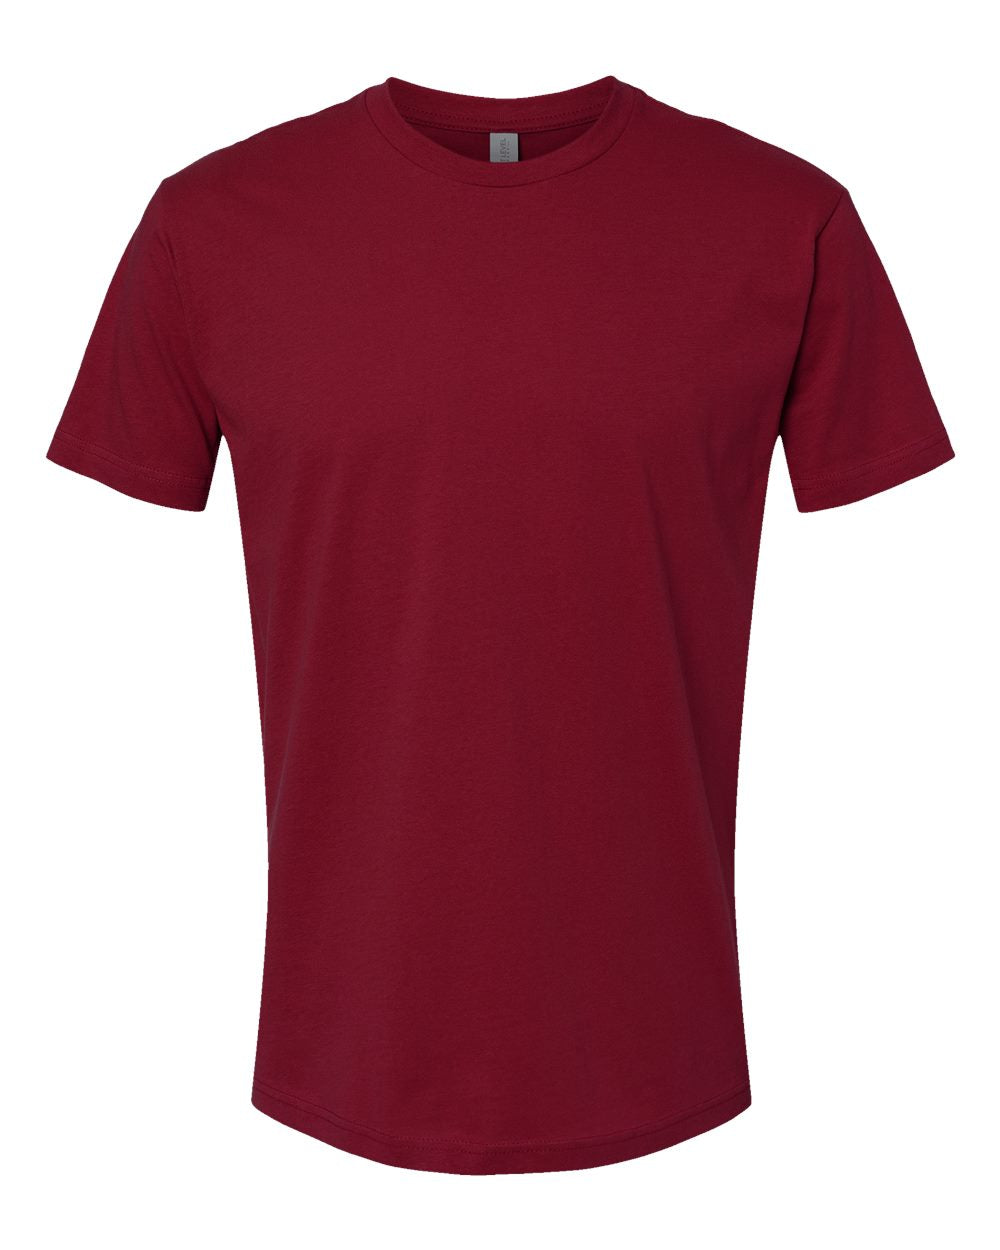 Next Level Cotton Tee (3600) in Cardinal